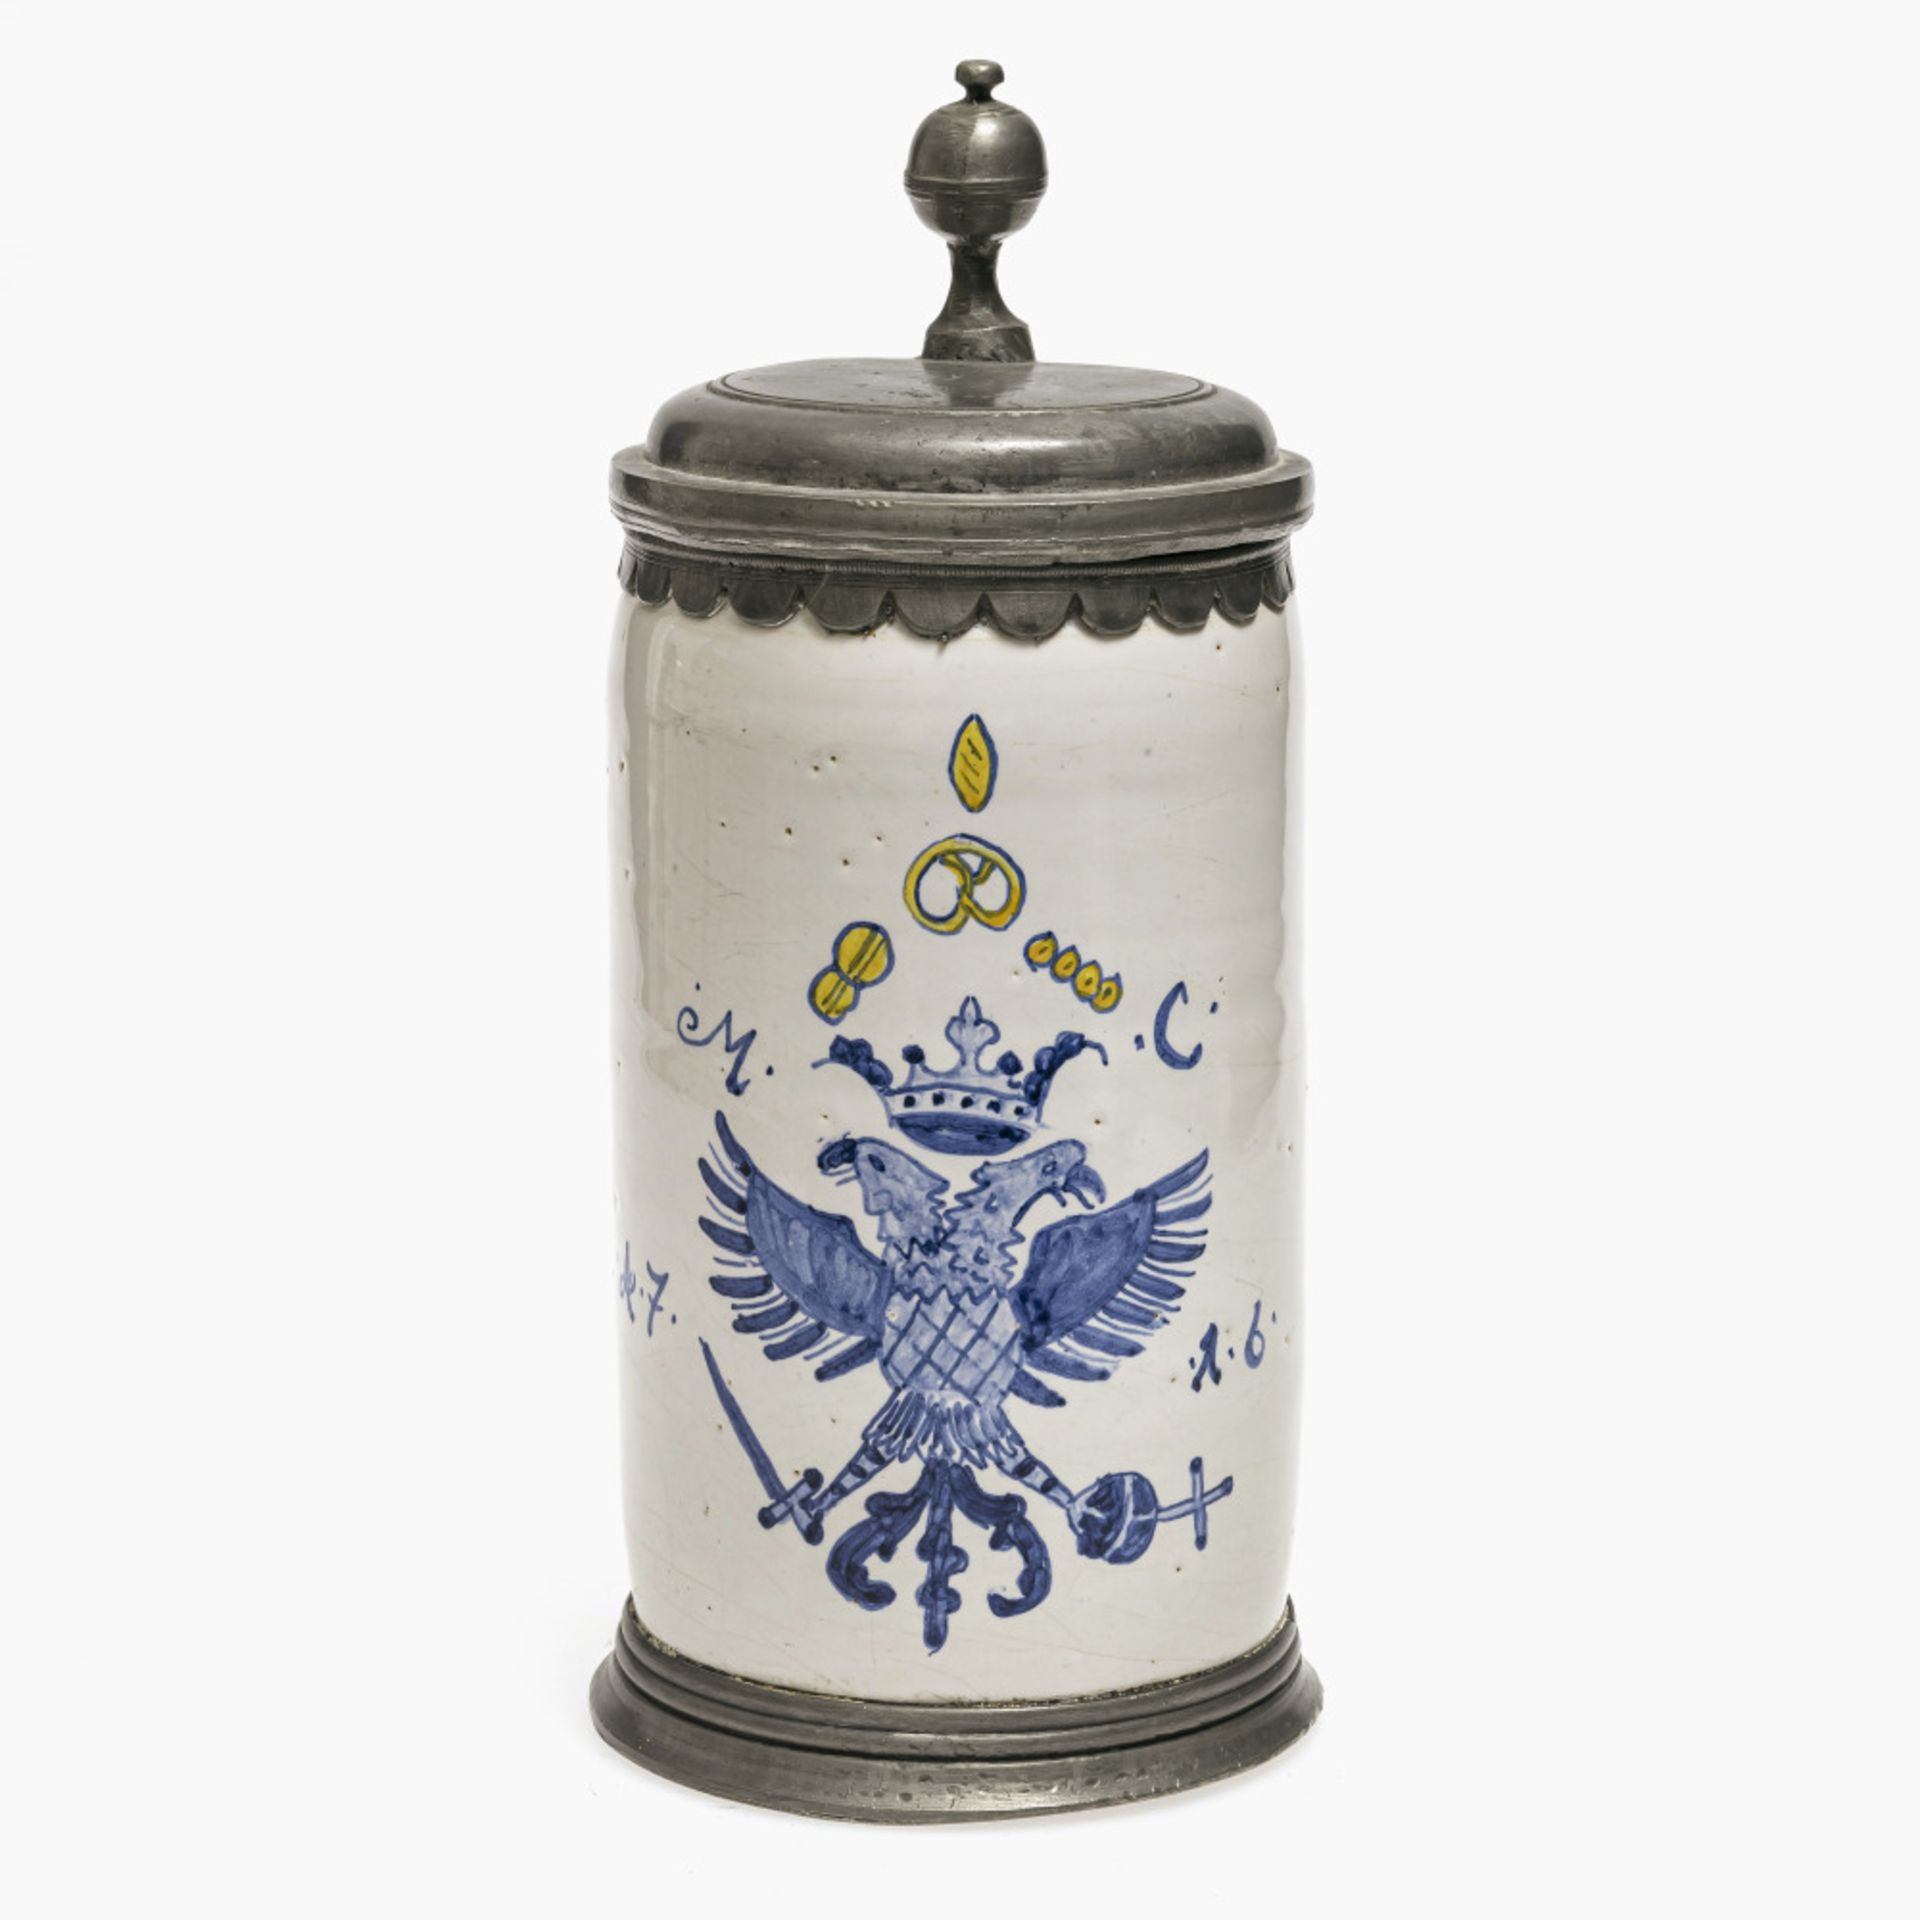 A tankard with the bakers guild symbol - In the style of the Hanau manufactory of the 18th century